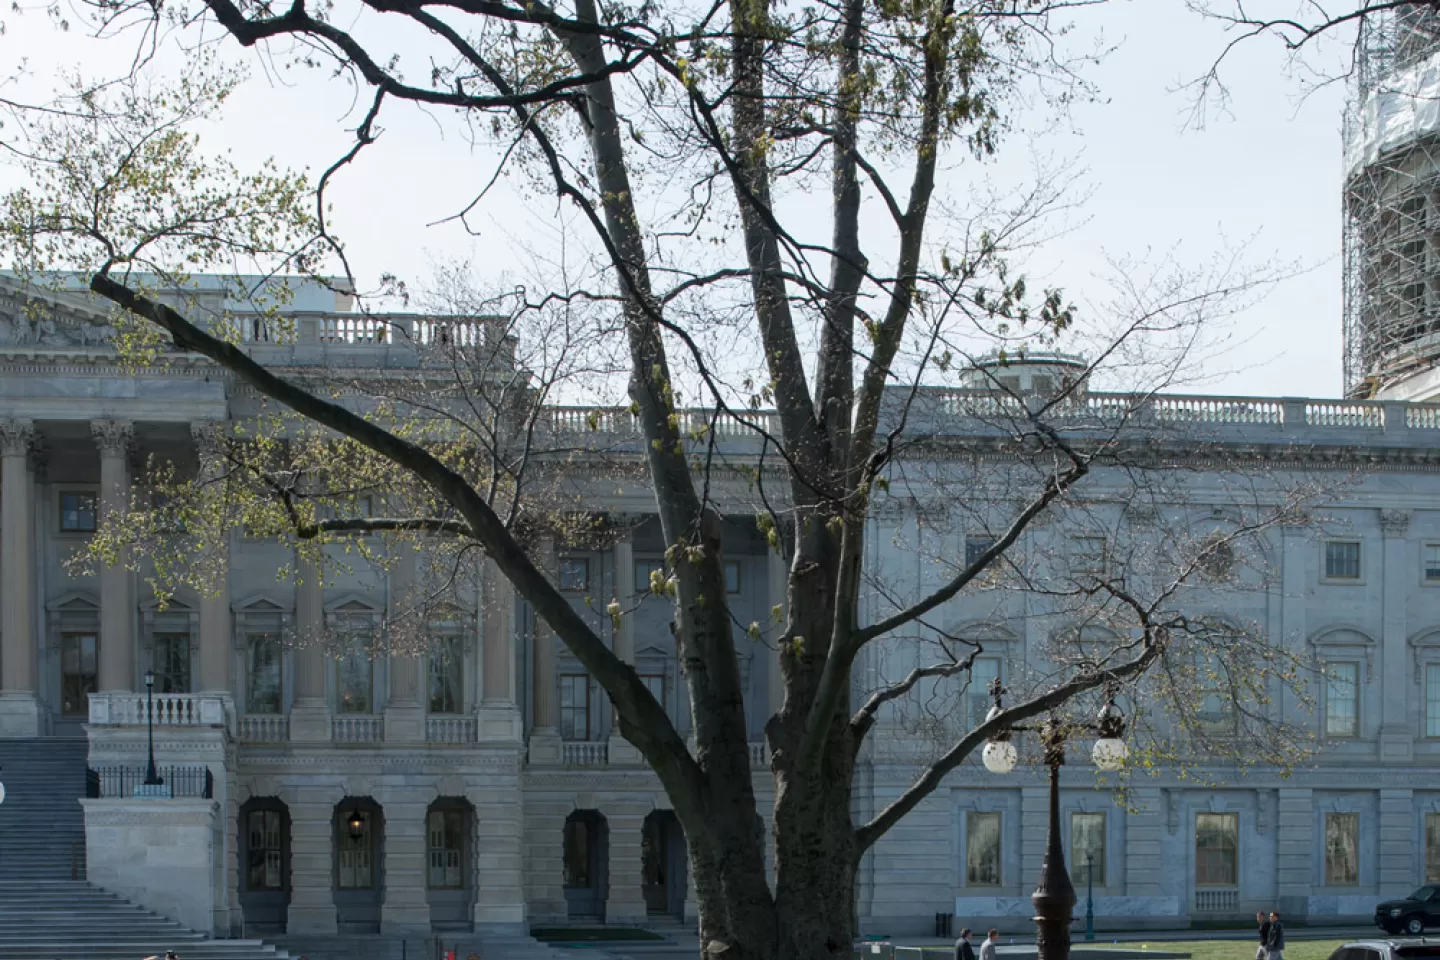 The Rep. Joseph Walsh tree on the U.S. Capitol Grounds during spring.